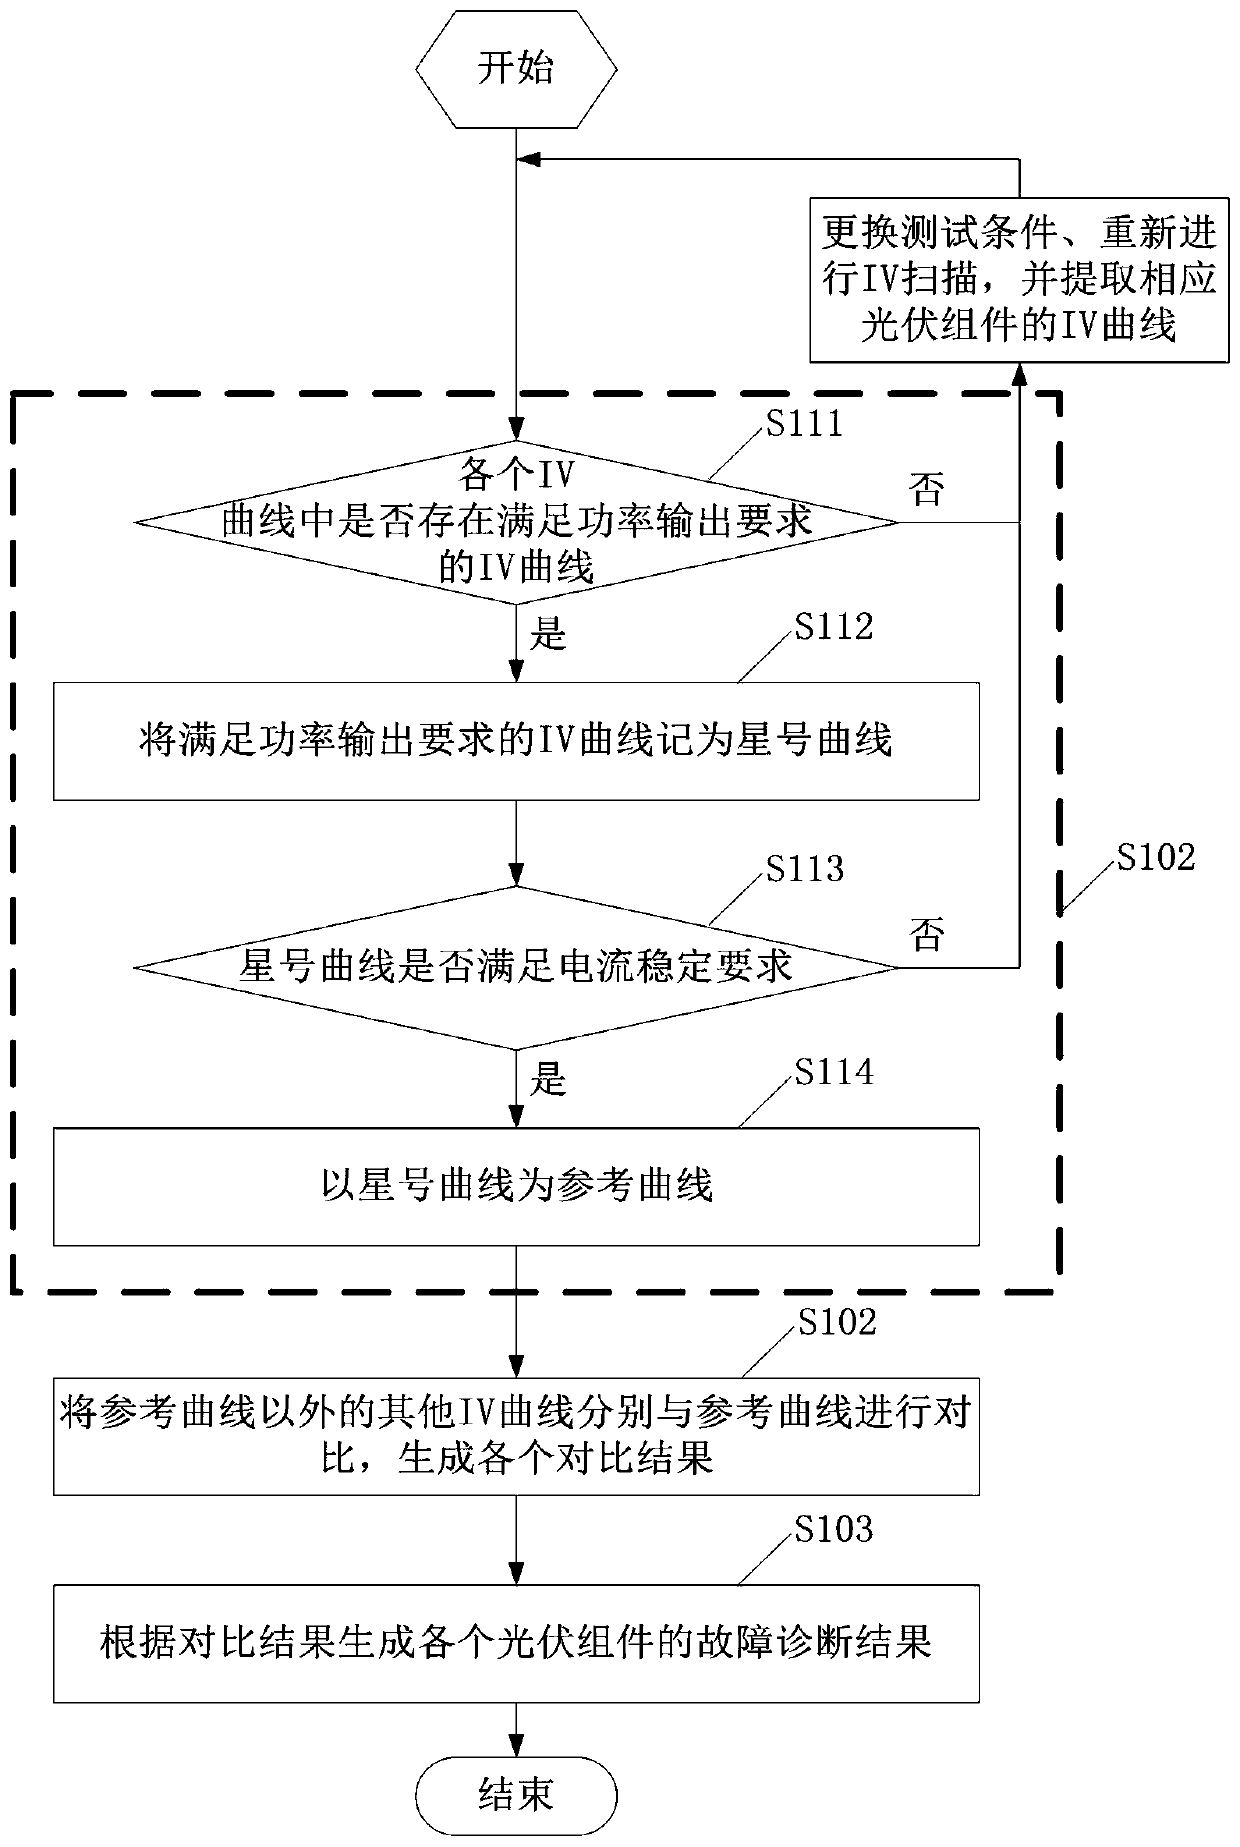 Photovoltaic module fault diagnosis method, edge computing processing device and inverter